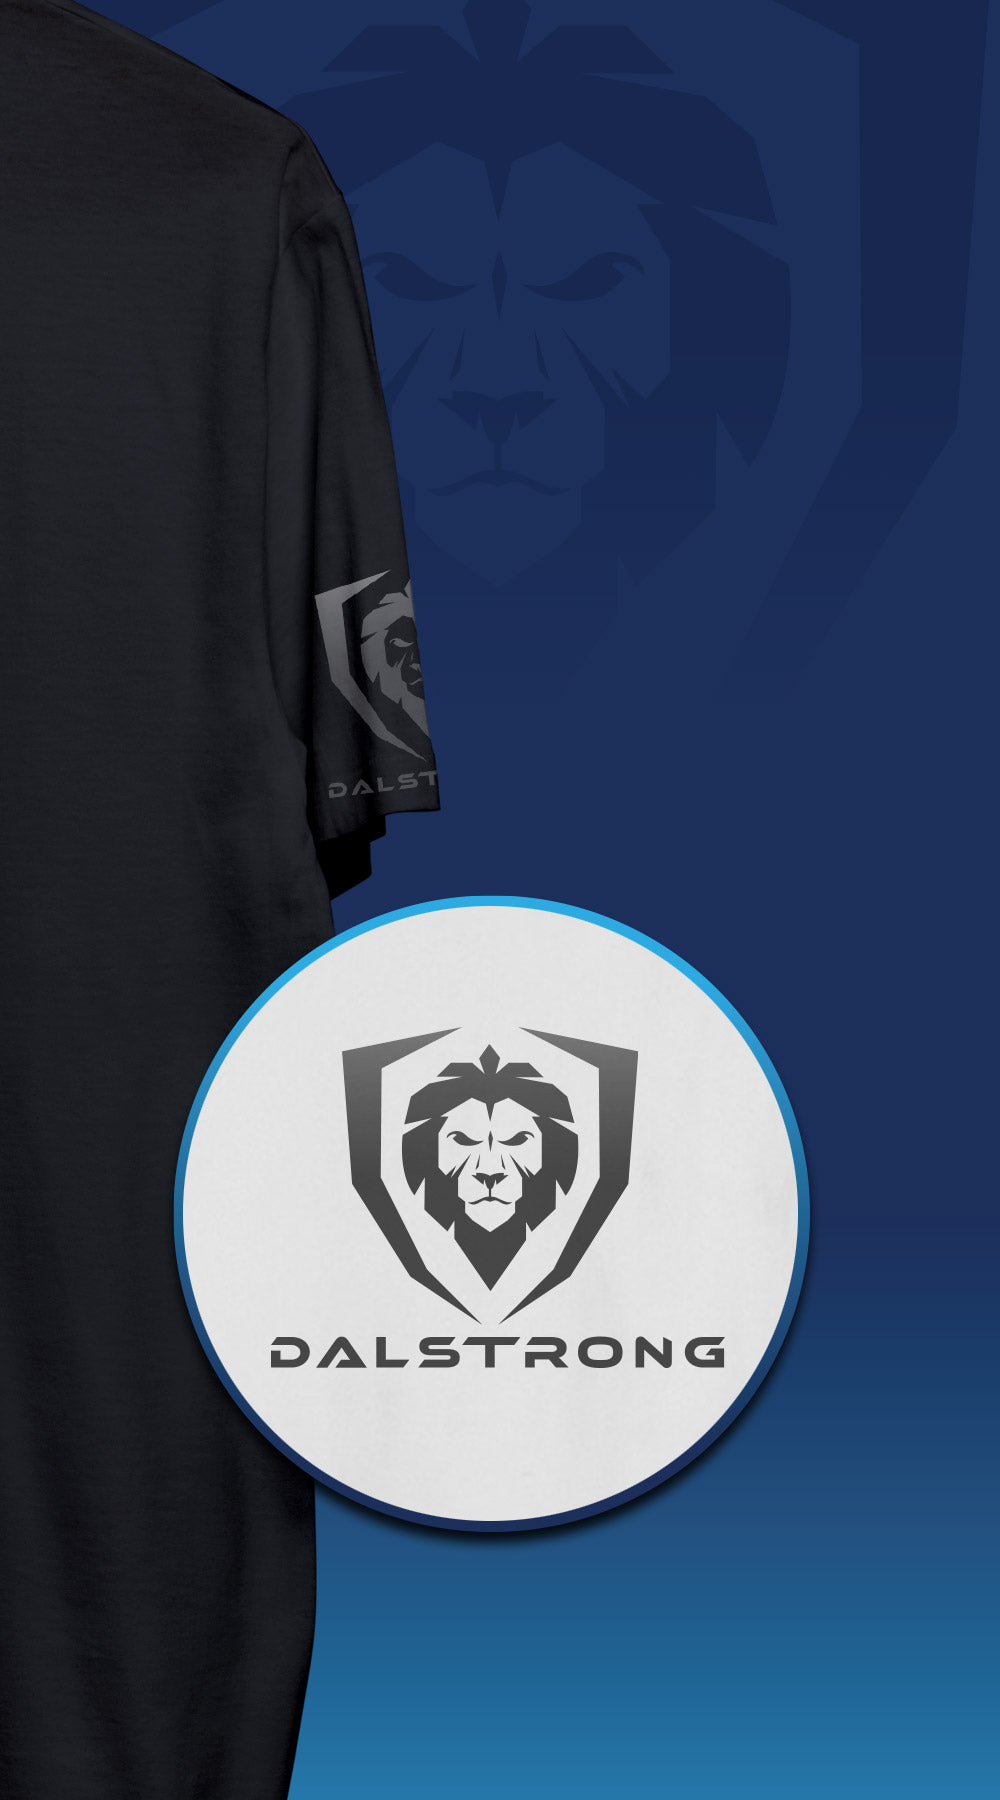 Dalstrong light your fire tee black with dalstorng name and logo.